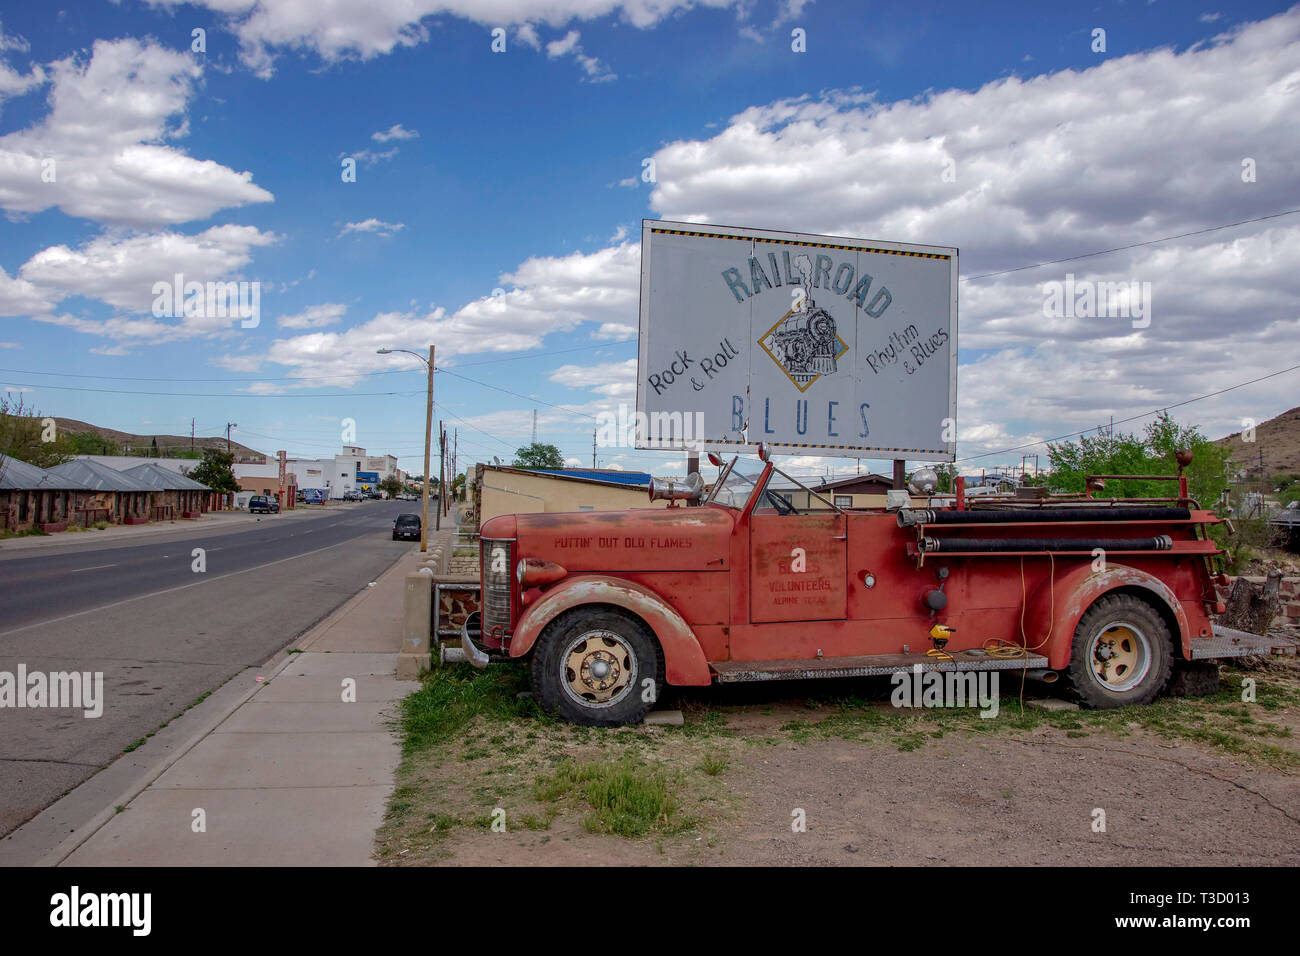 Vintage fire trcuck on display in Alpine, Texas, as a tourist attraction. Stock Photo